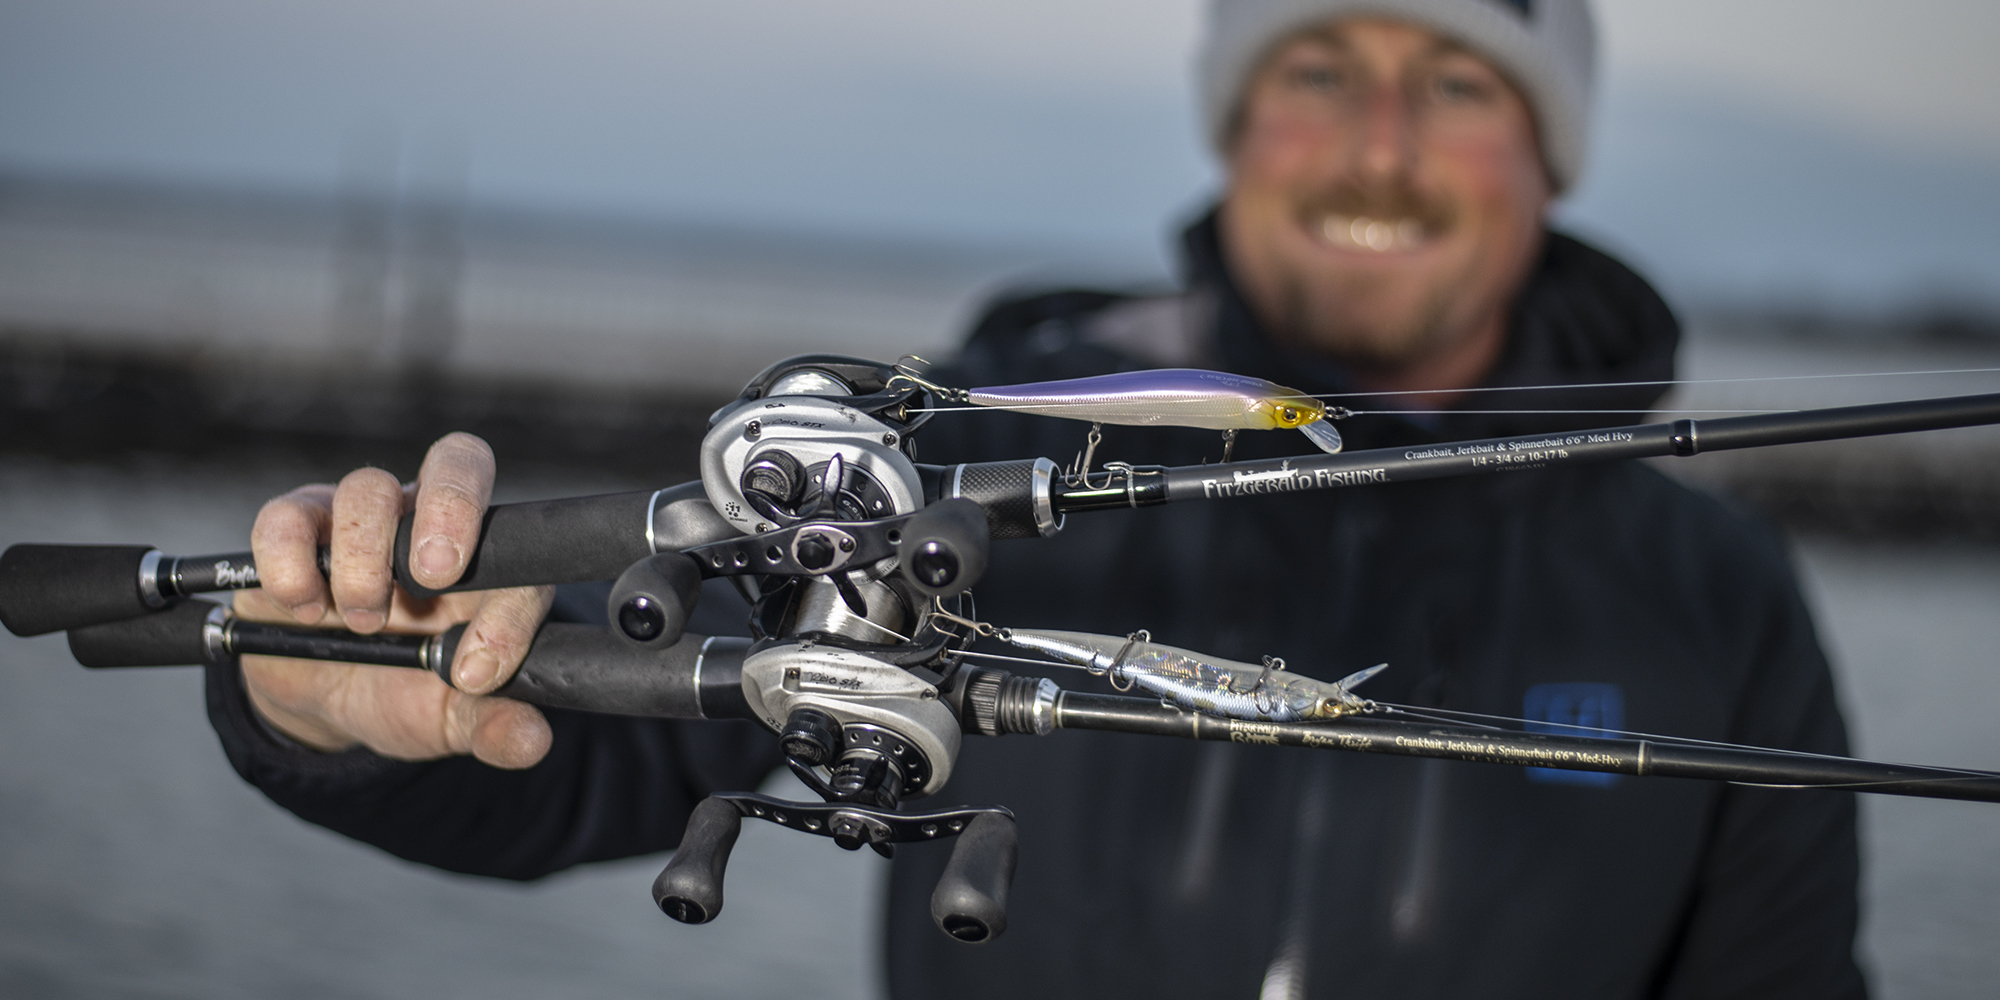 TOP 10 BAITS & PATTERNS: How the Best Caught 'em At REDREST